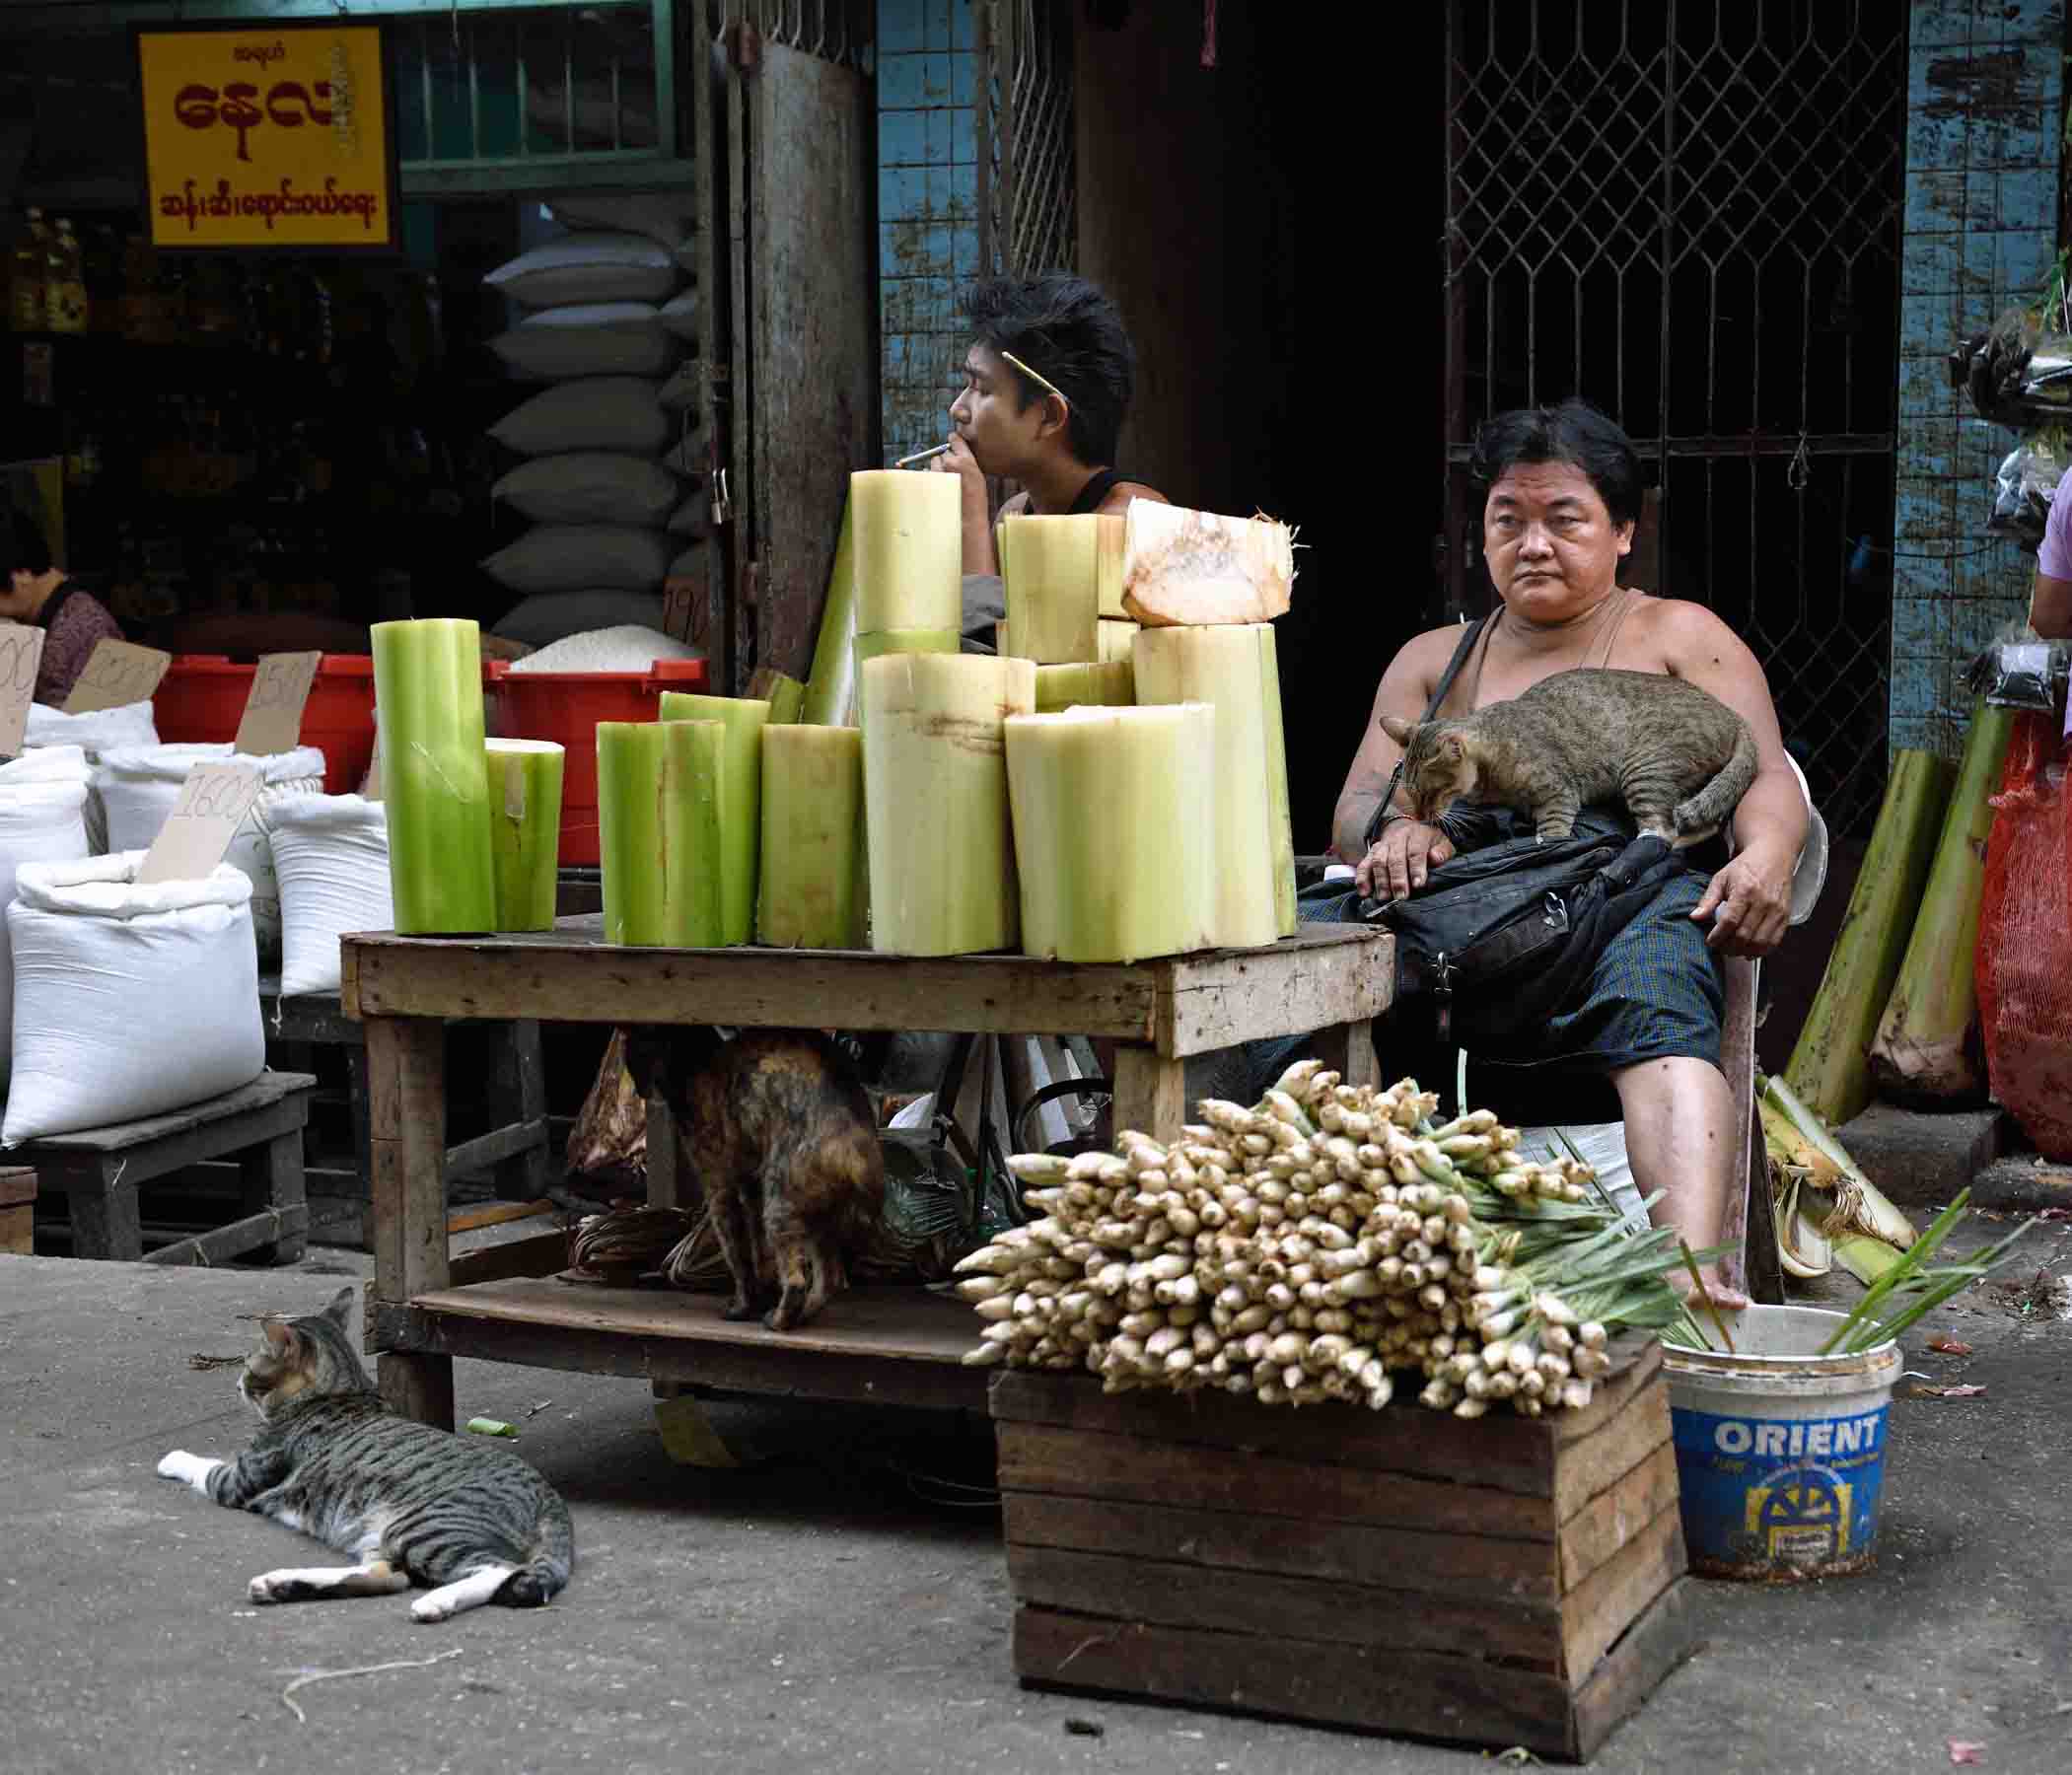 A cat-friendly vendor selling large green banana stems used to make Mohinga (vermicelli in fish broth), Burma’s unofficial “national dish”. (Photo: Naomi Hellmann)